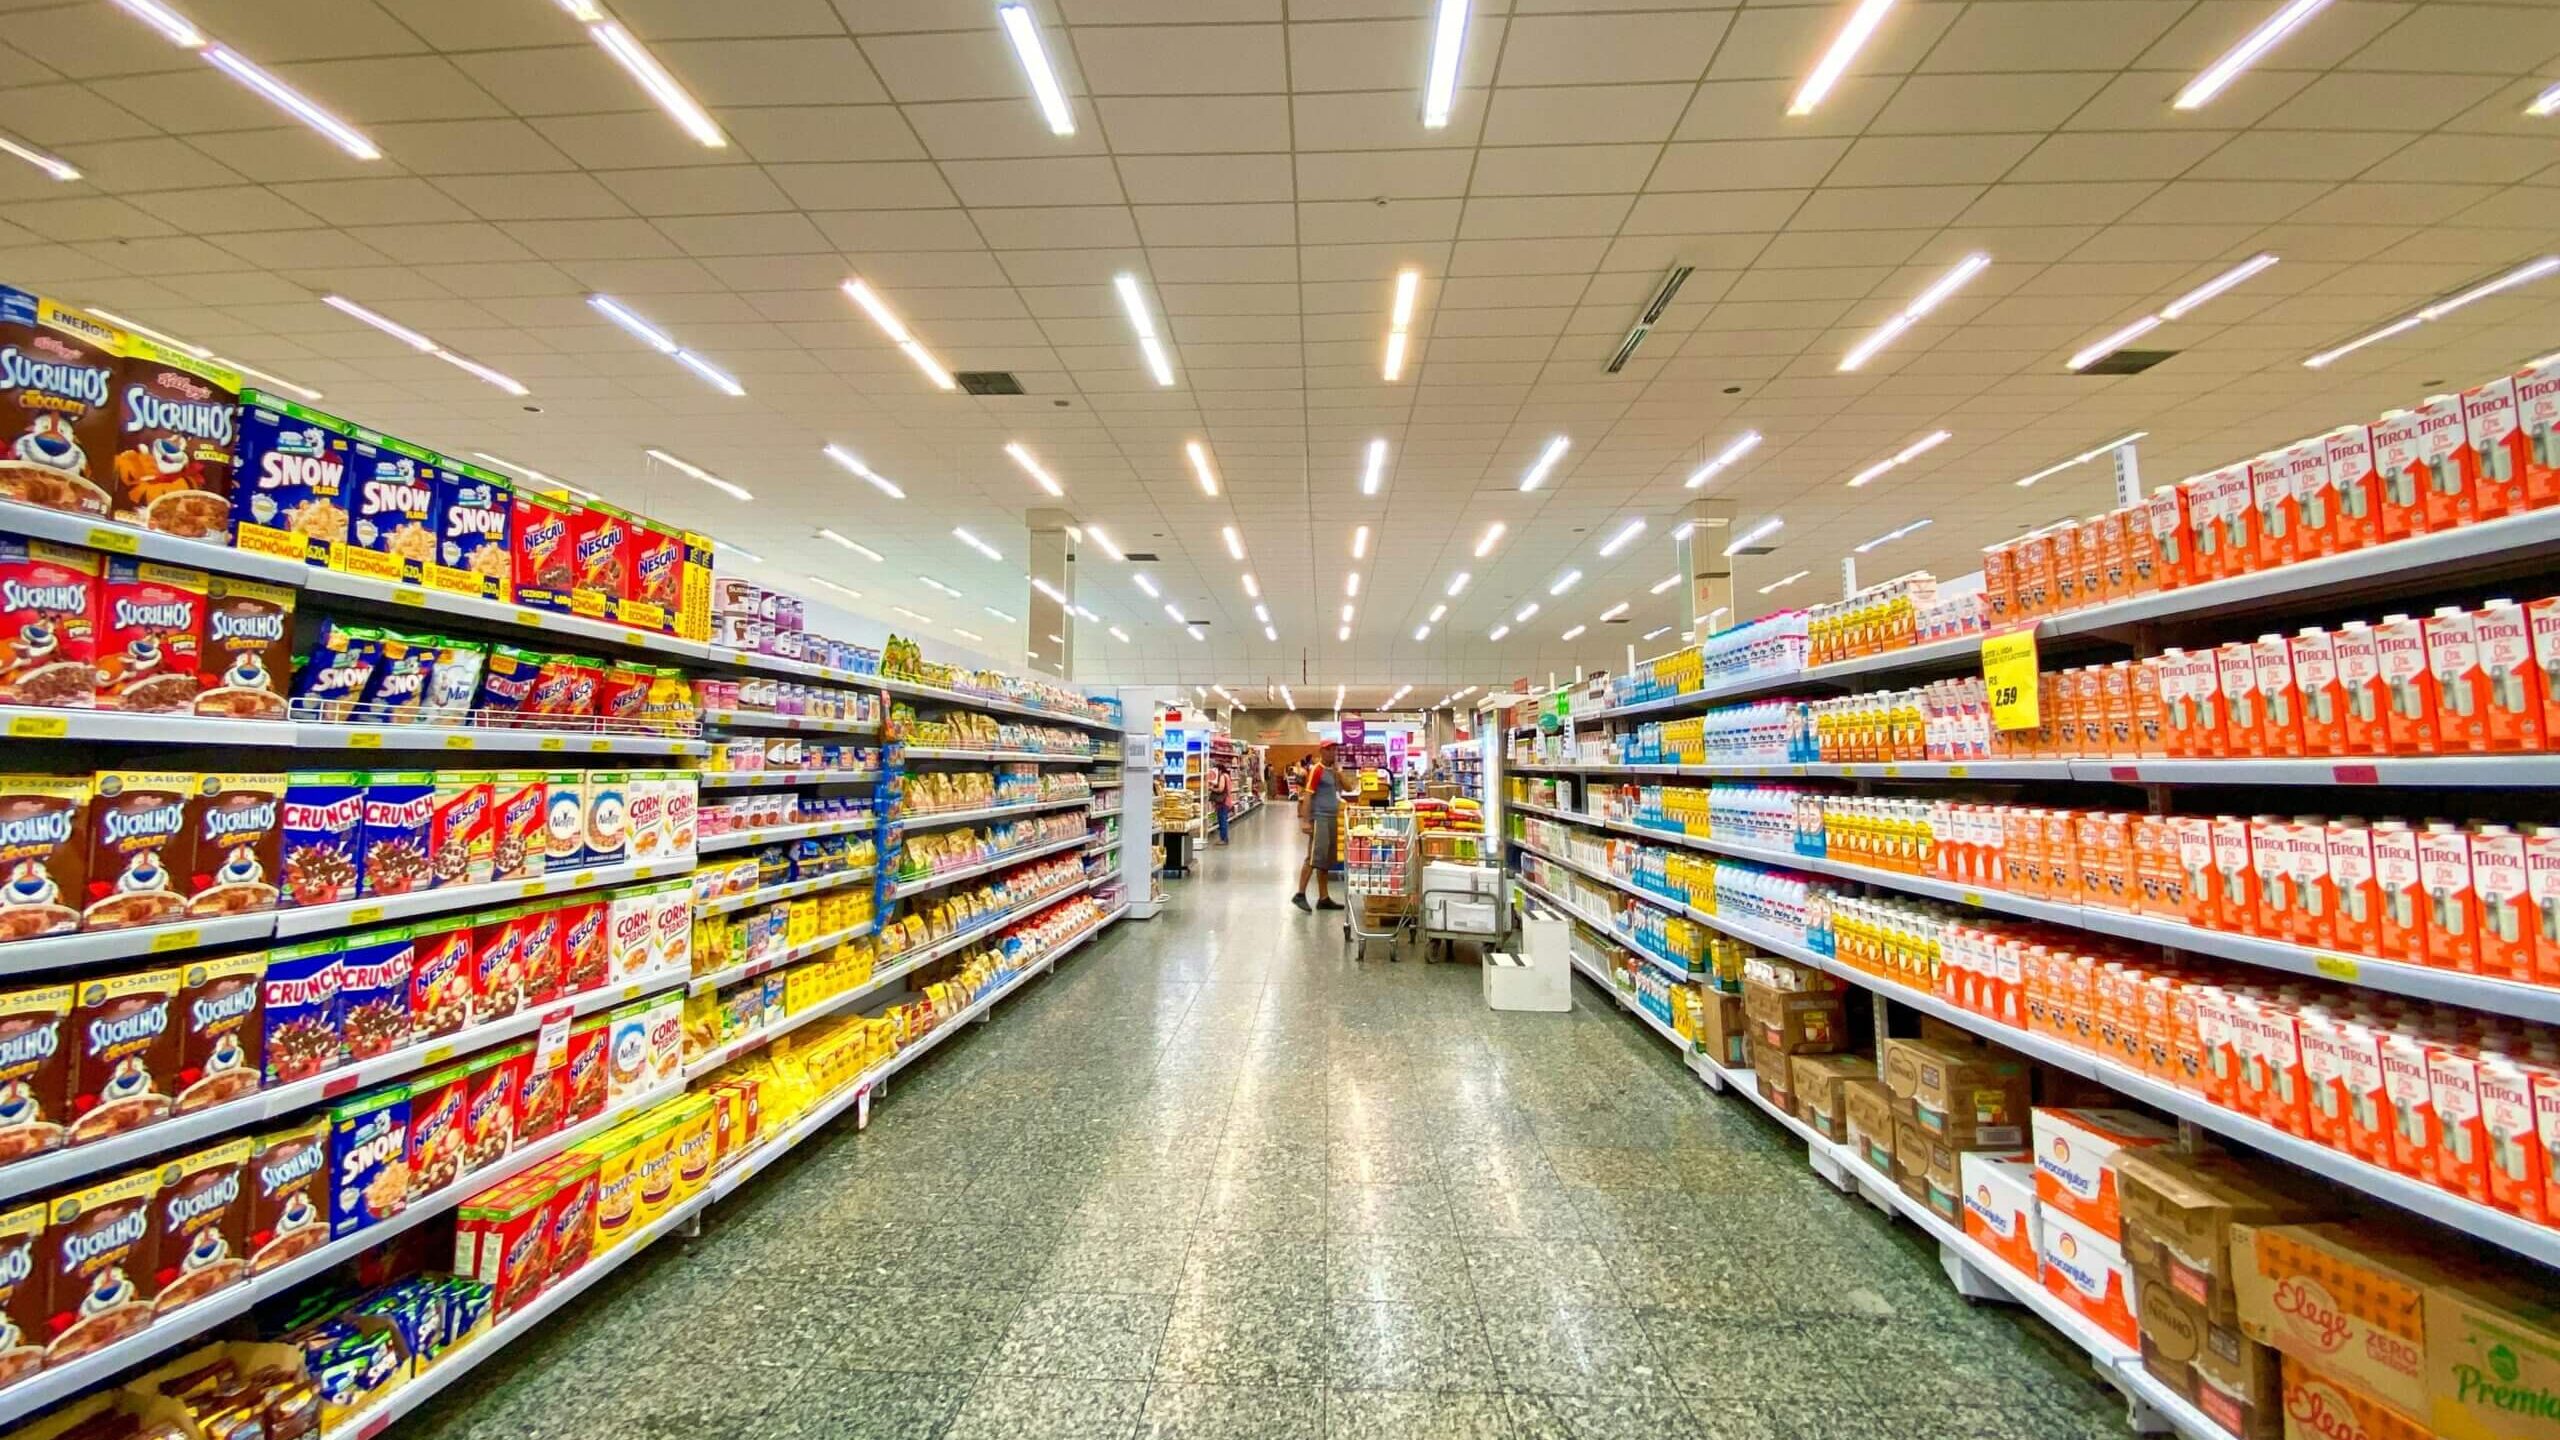 AI retail shelf monitoring solutions provide retailers an opportunity to make smarter decisions about sales, marketing, staffing, security and many more.